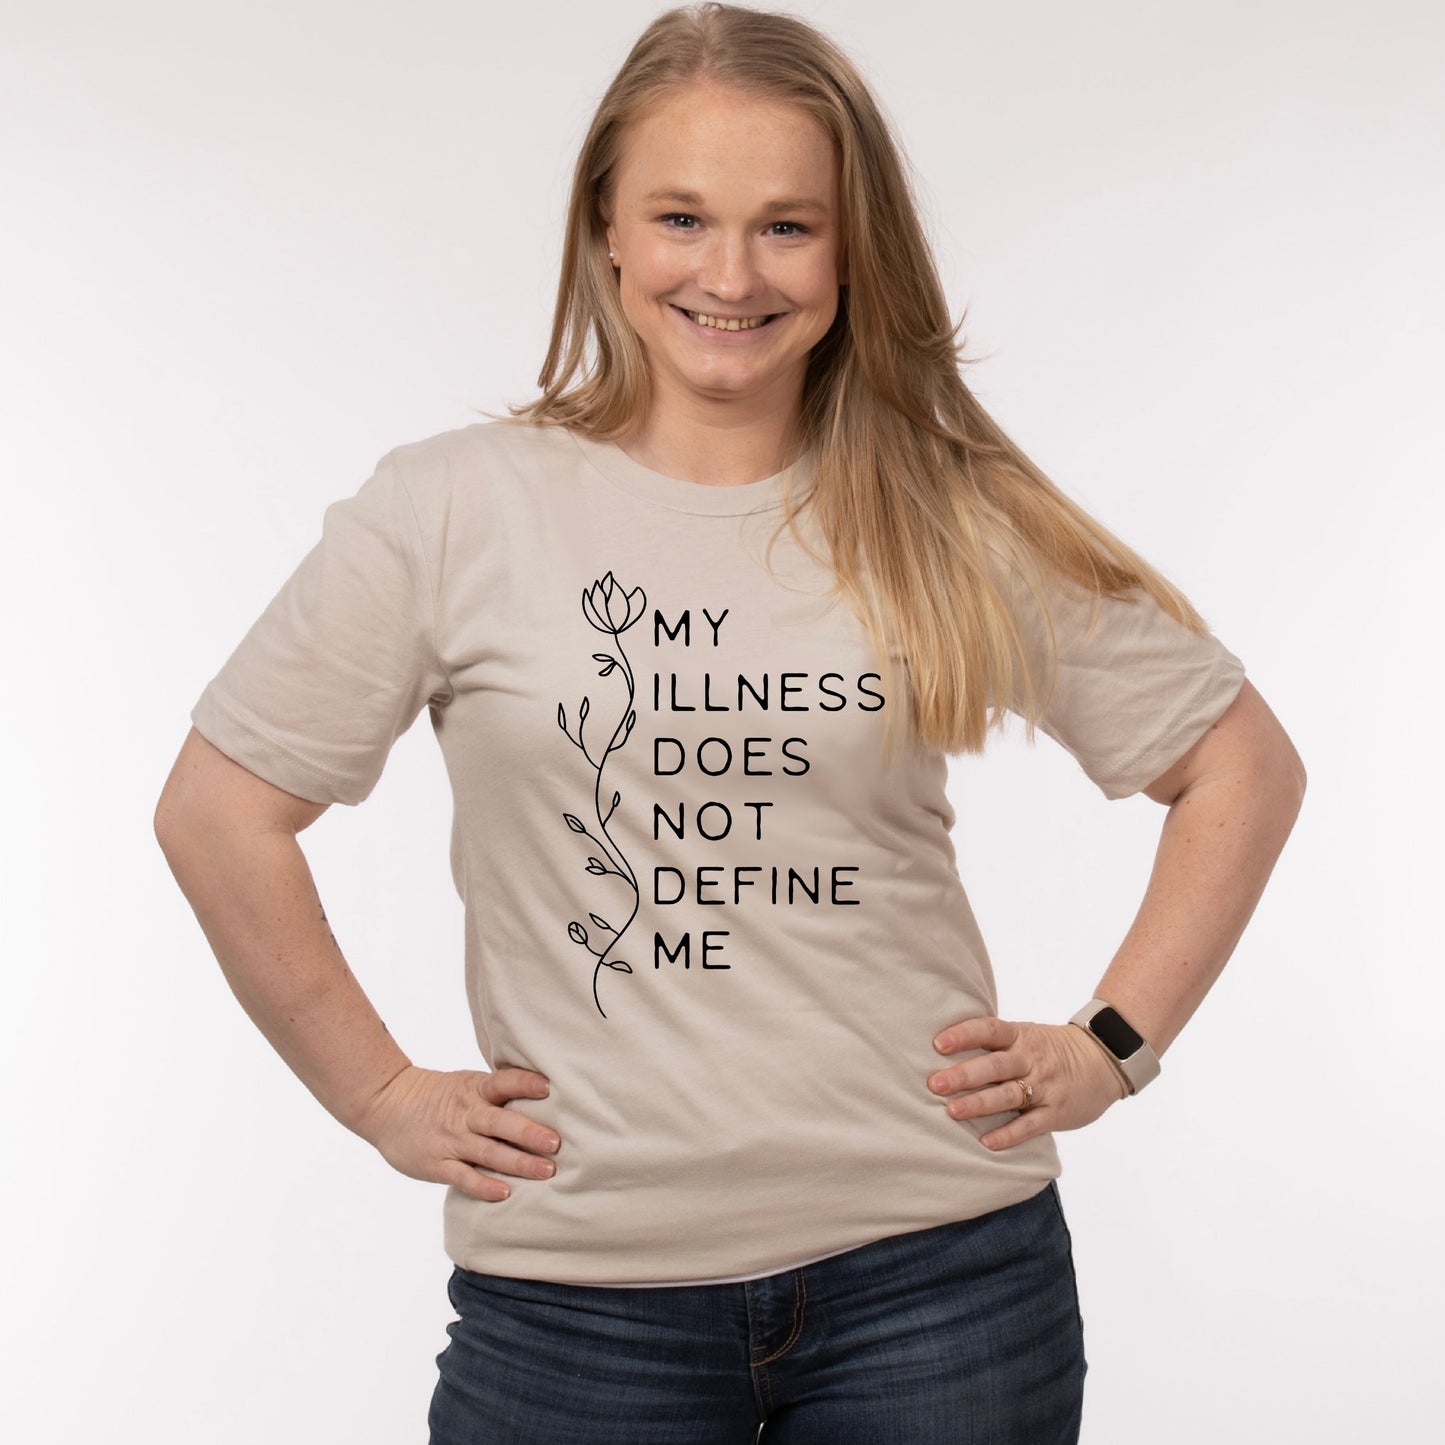 My Illness Does Not Define Me T-shirt